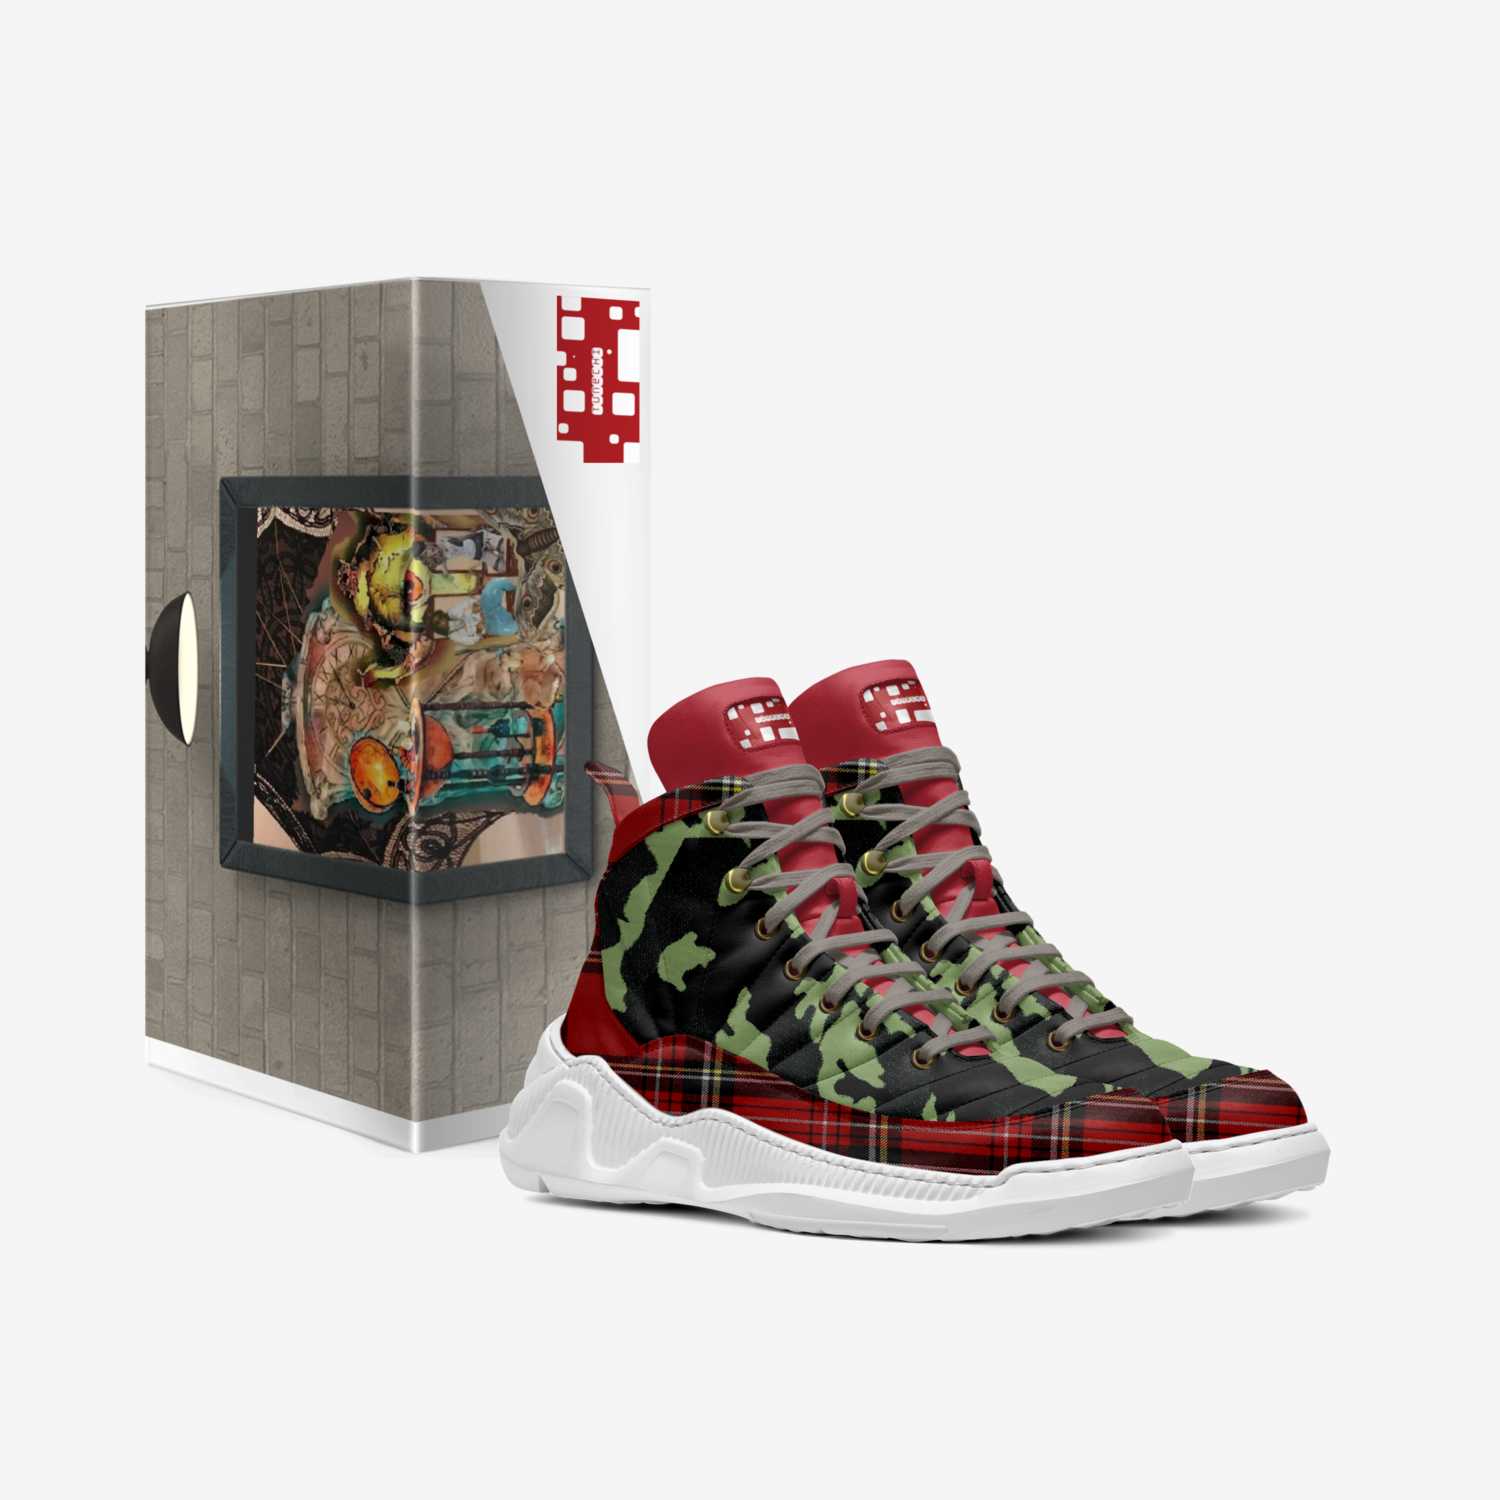 YMCMB custom made in Italy shoes by Tabatha Tuszynski | Box view